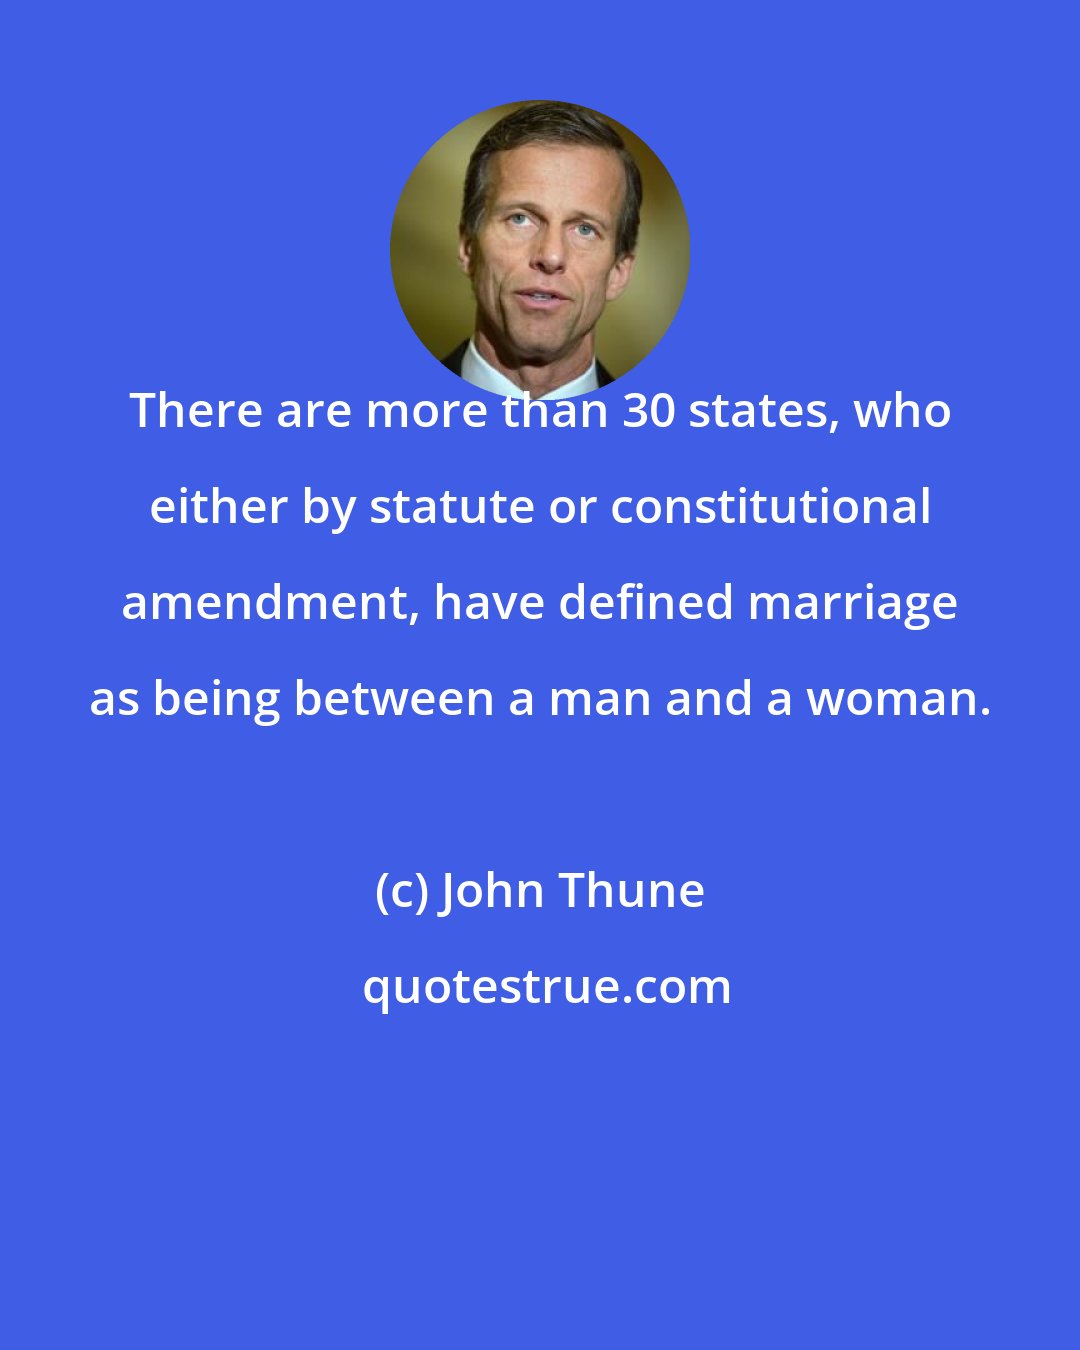 John Thune: There are more than 30 states, who either by statute or constitutional amendment, have defined marriage as being between a man and a woman.